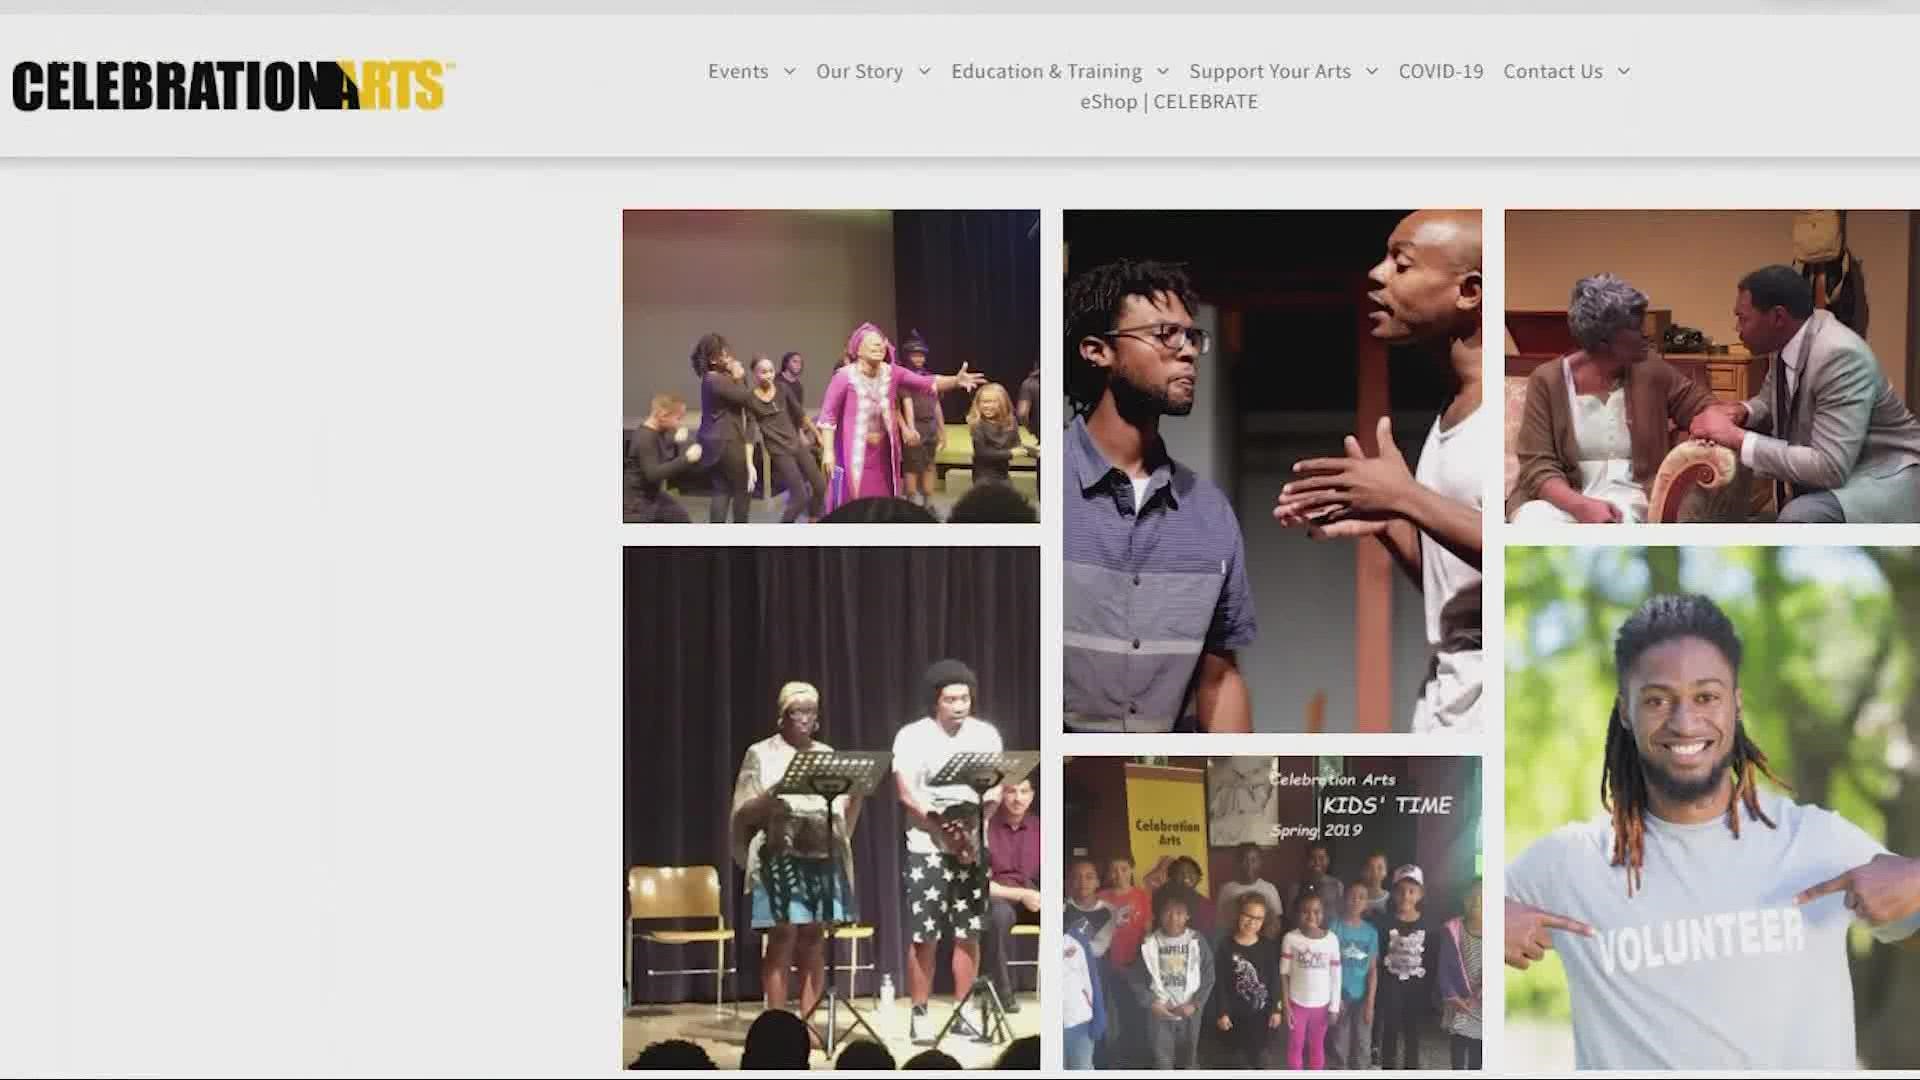 In Sacramento, Celebration Arts is a non-profit organization that provides performing arts training to Black people and others in underserved communities.